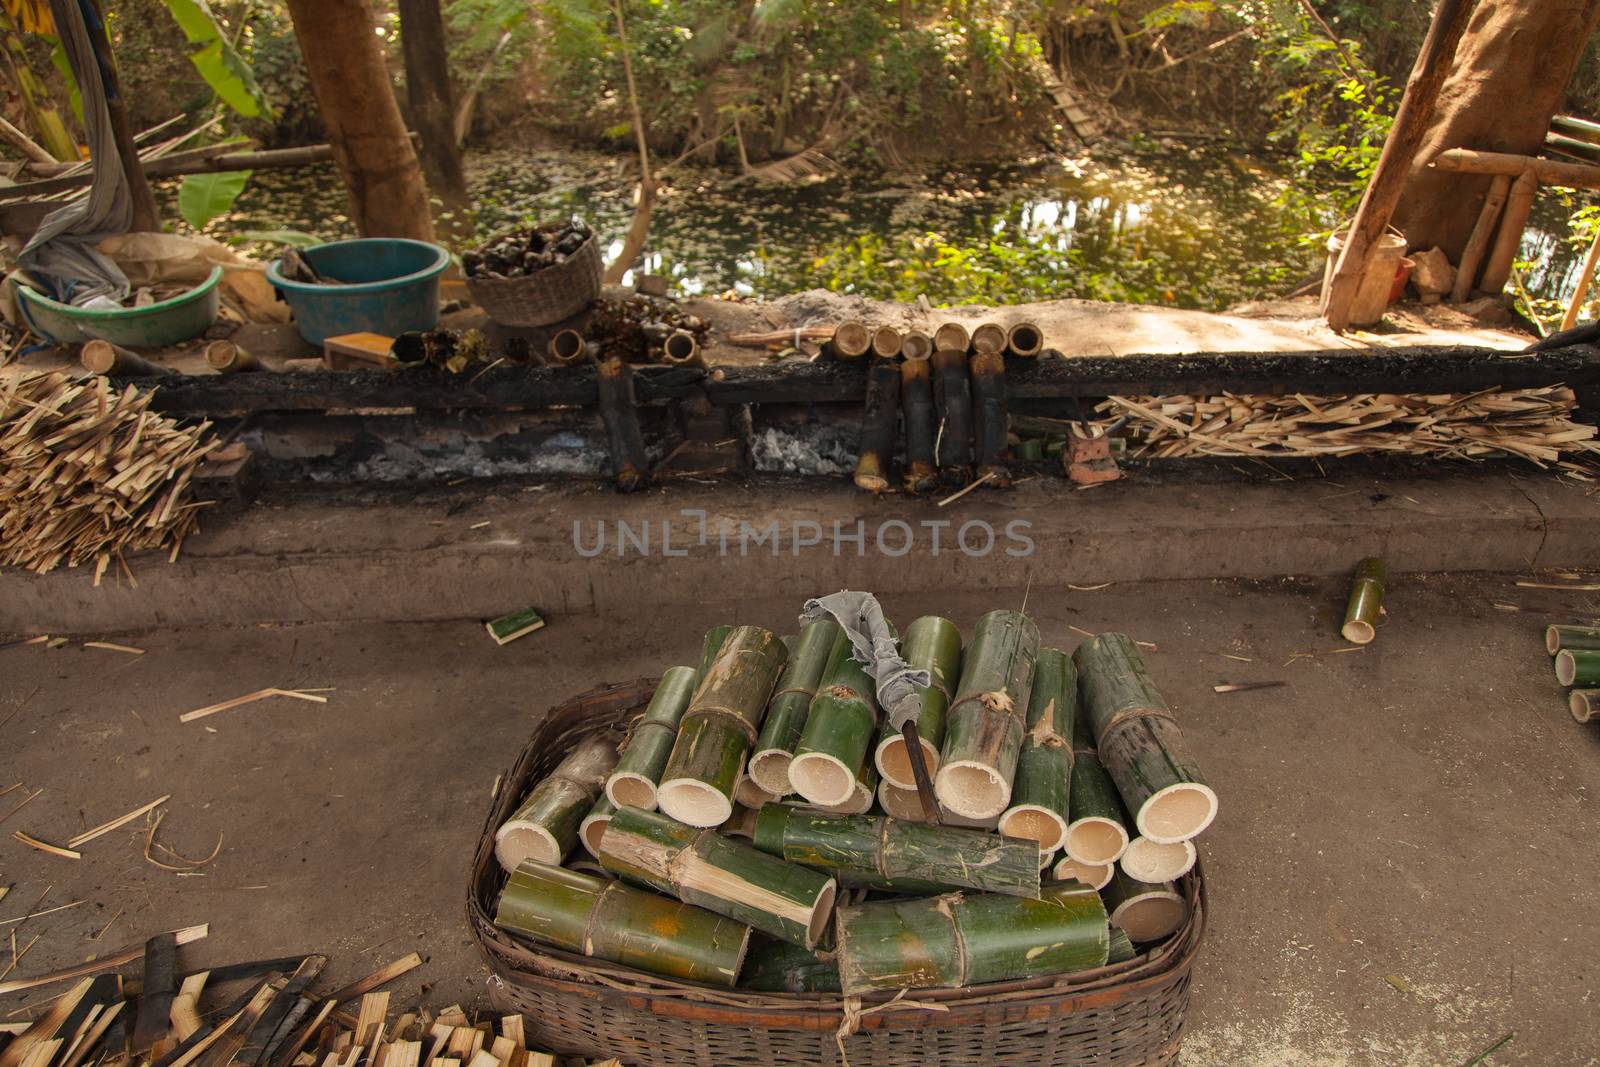 Traditional sticky rice cooked in bamboo as street food as found in Cambodia by kgboxford